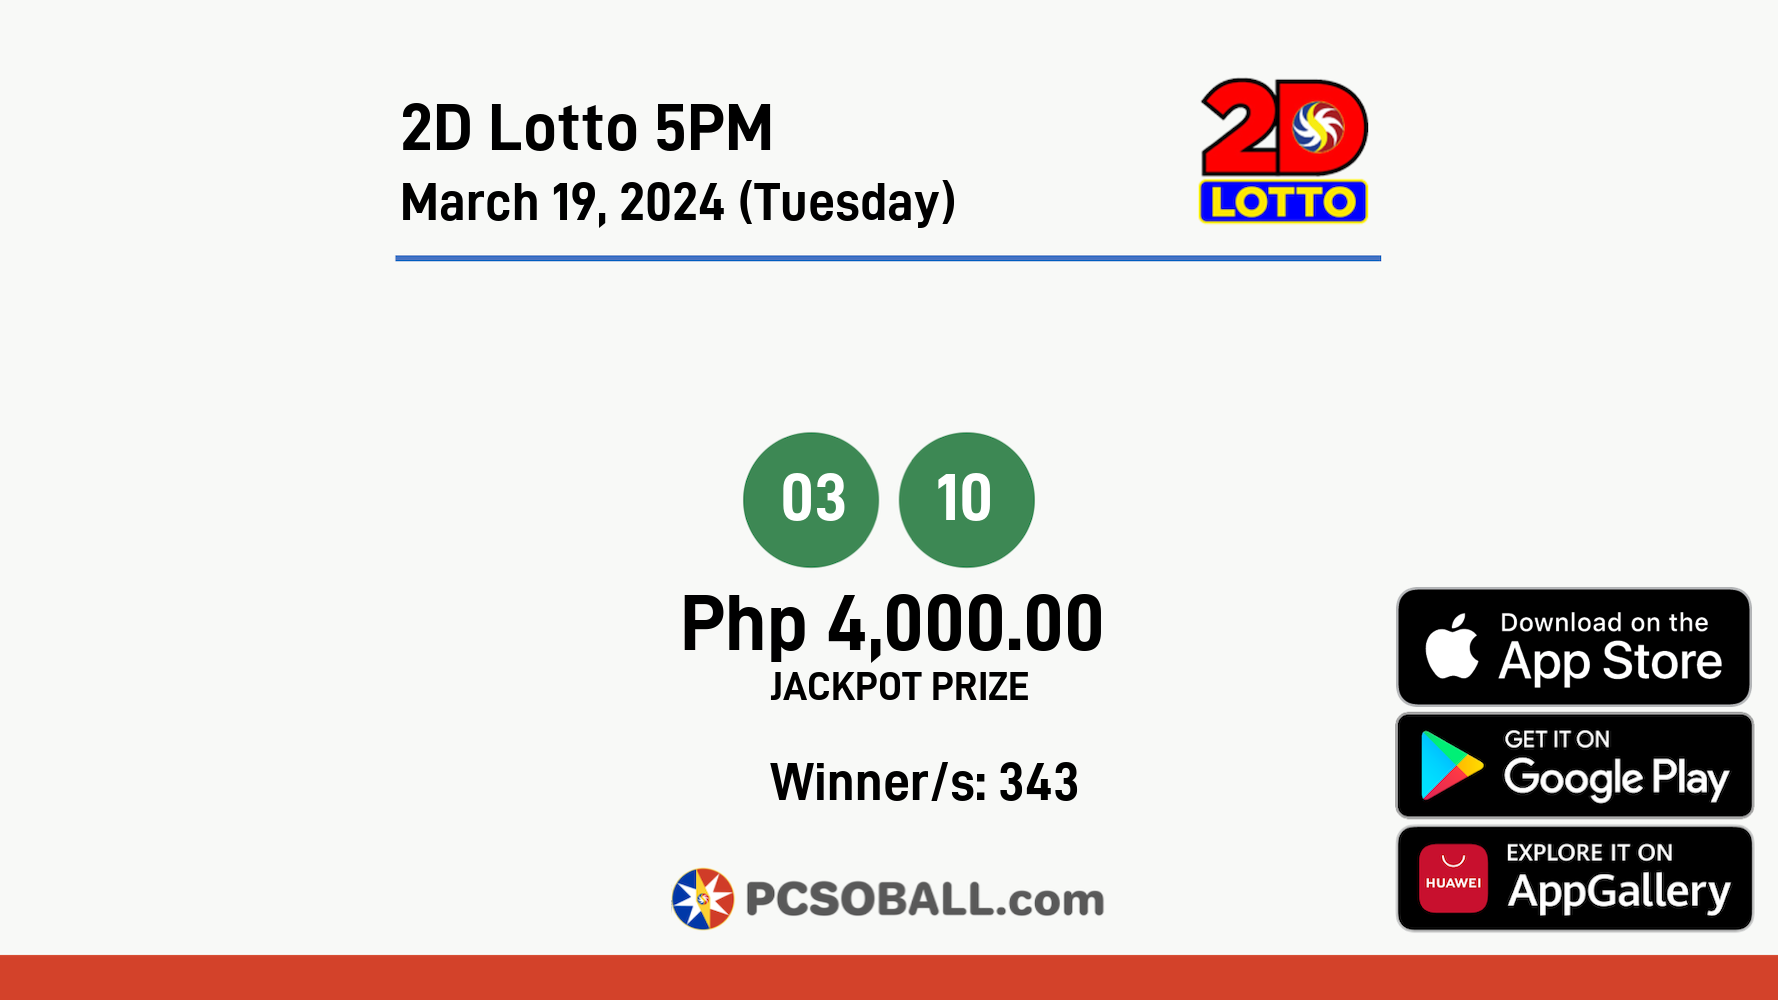 2D Lotto 5PM March 19, 2024 (Tuesday) Result